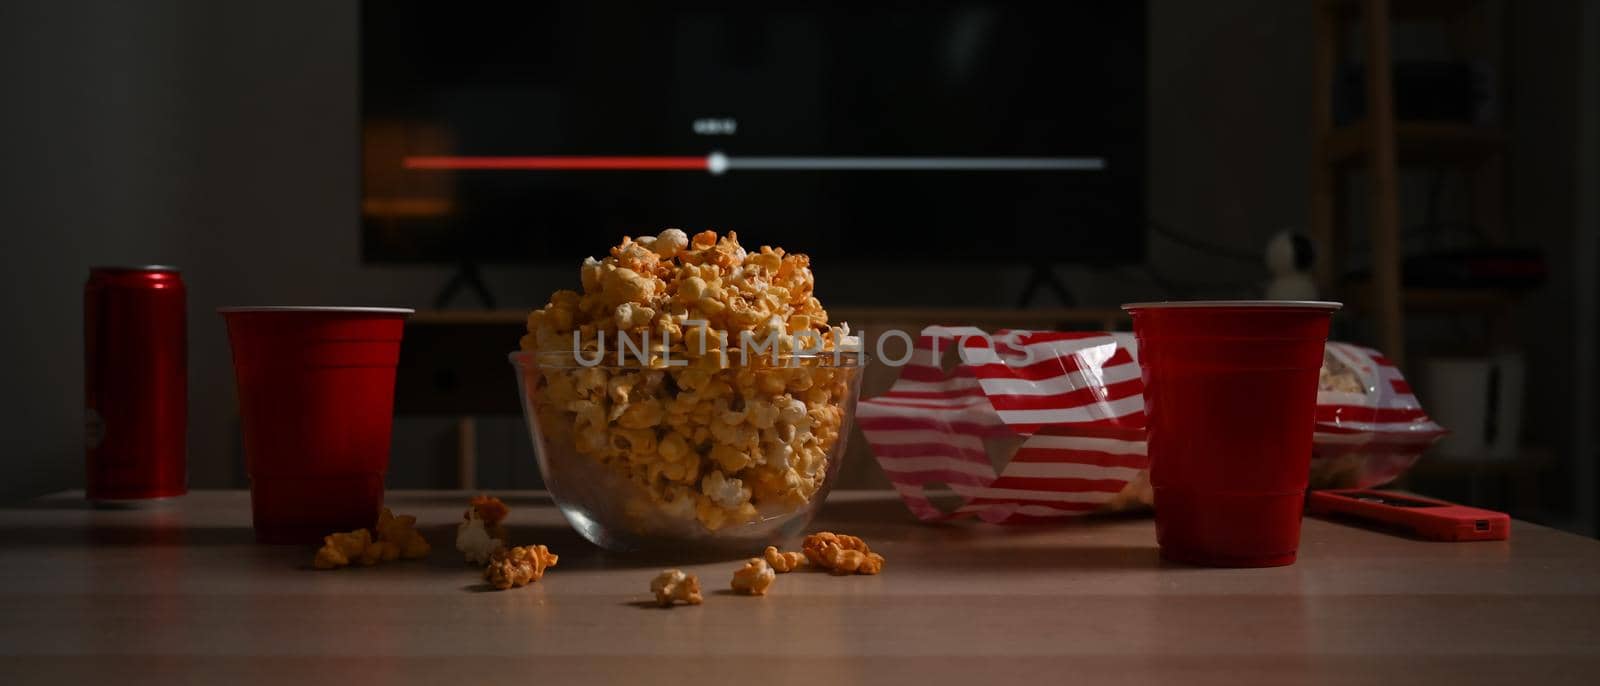 Bowl of tasty popcorn and cups on wooden table in living room. Family vacation, recreation, relaxation and hobby concept.